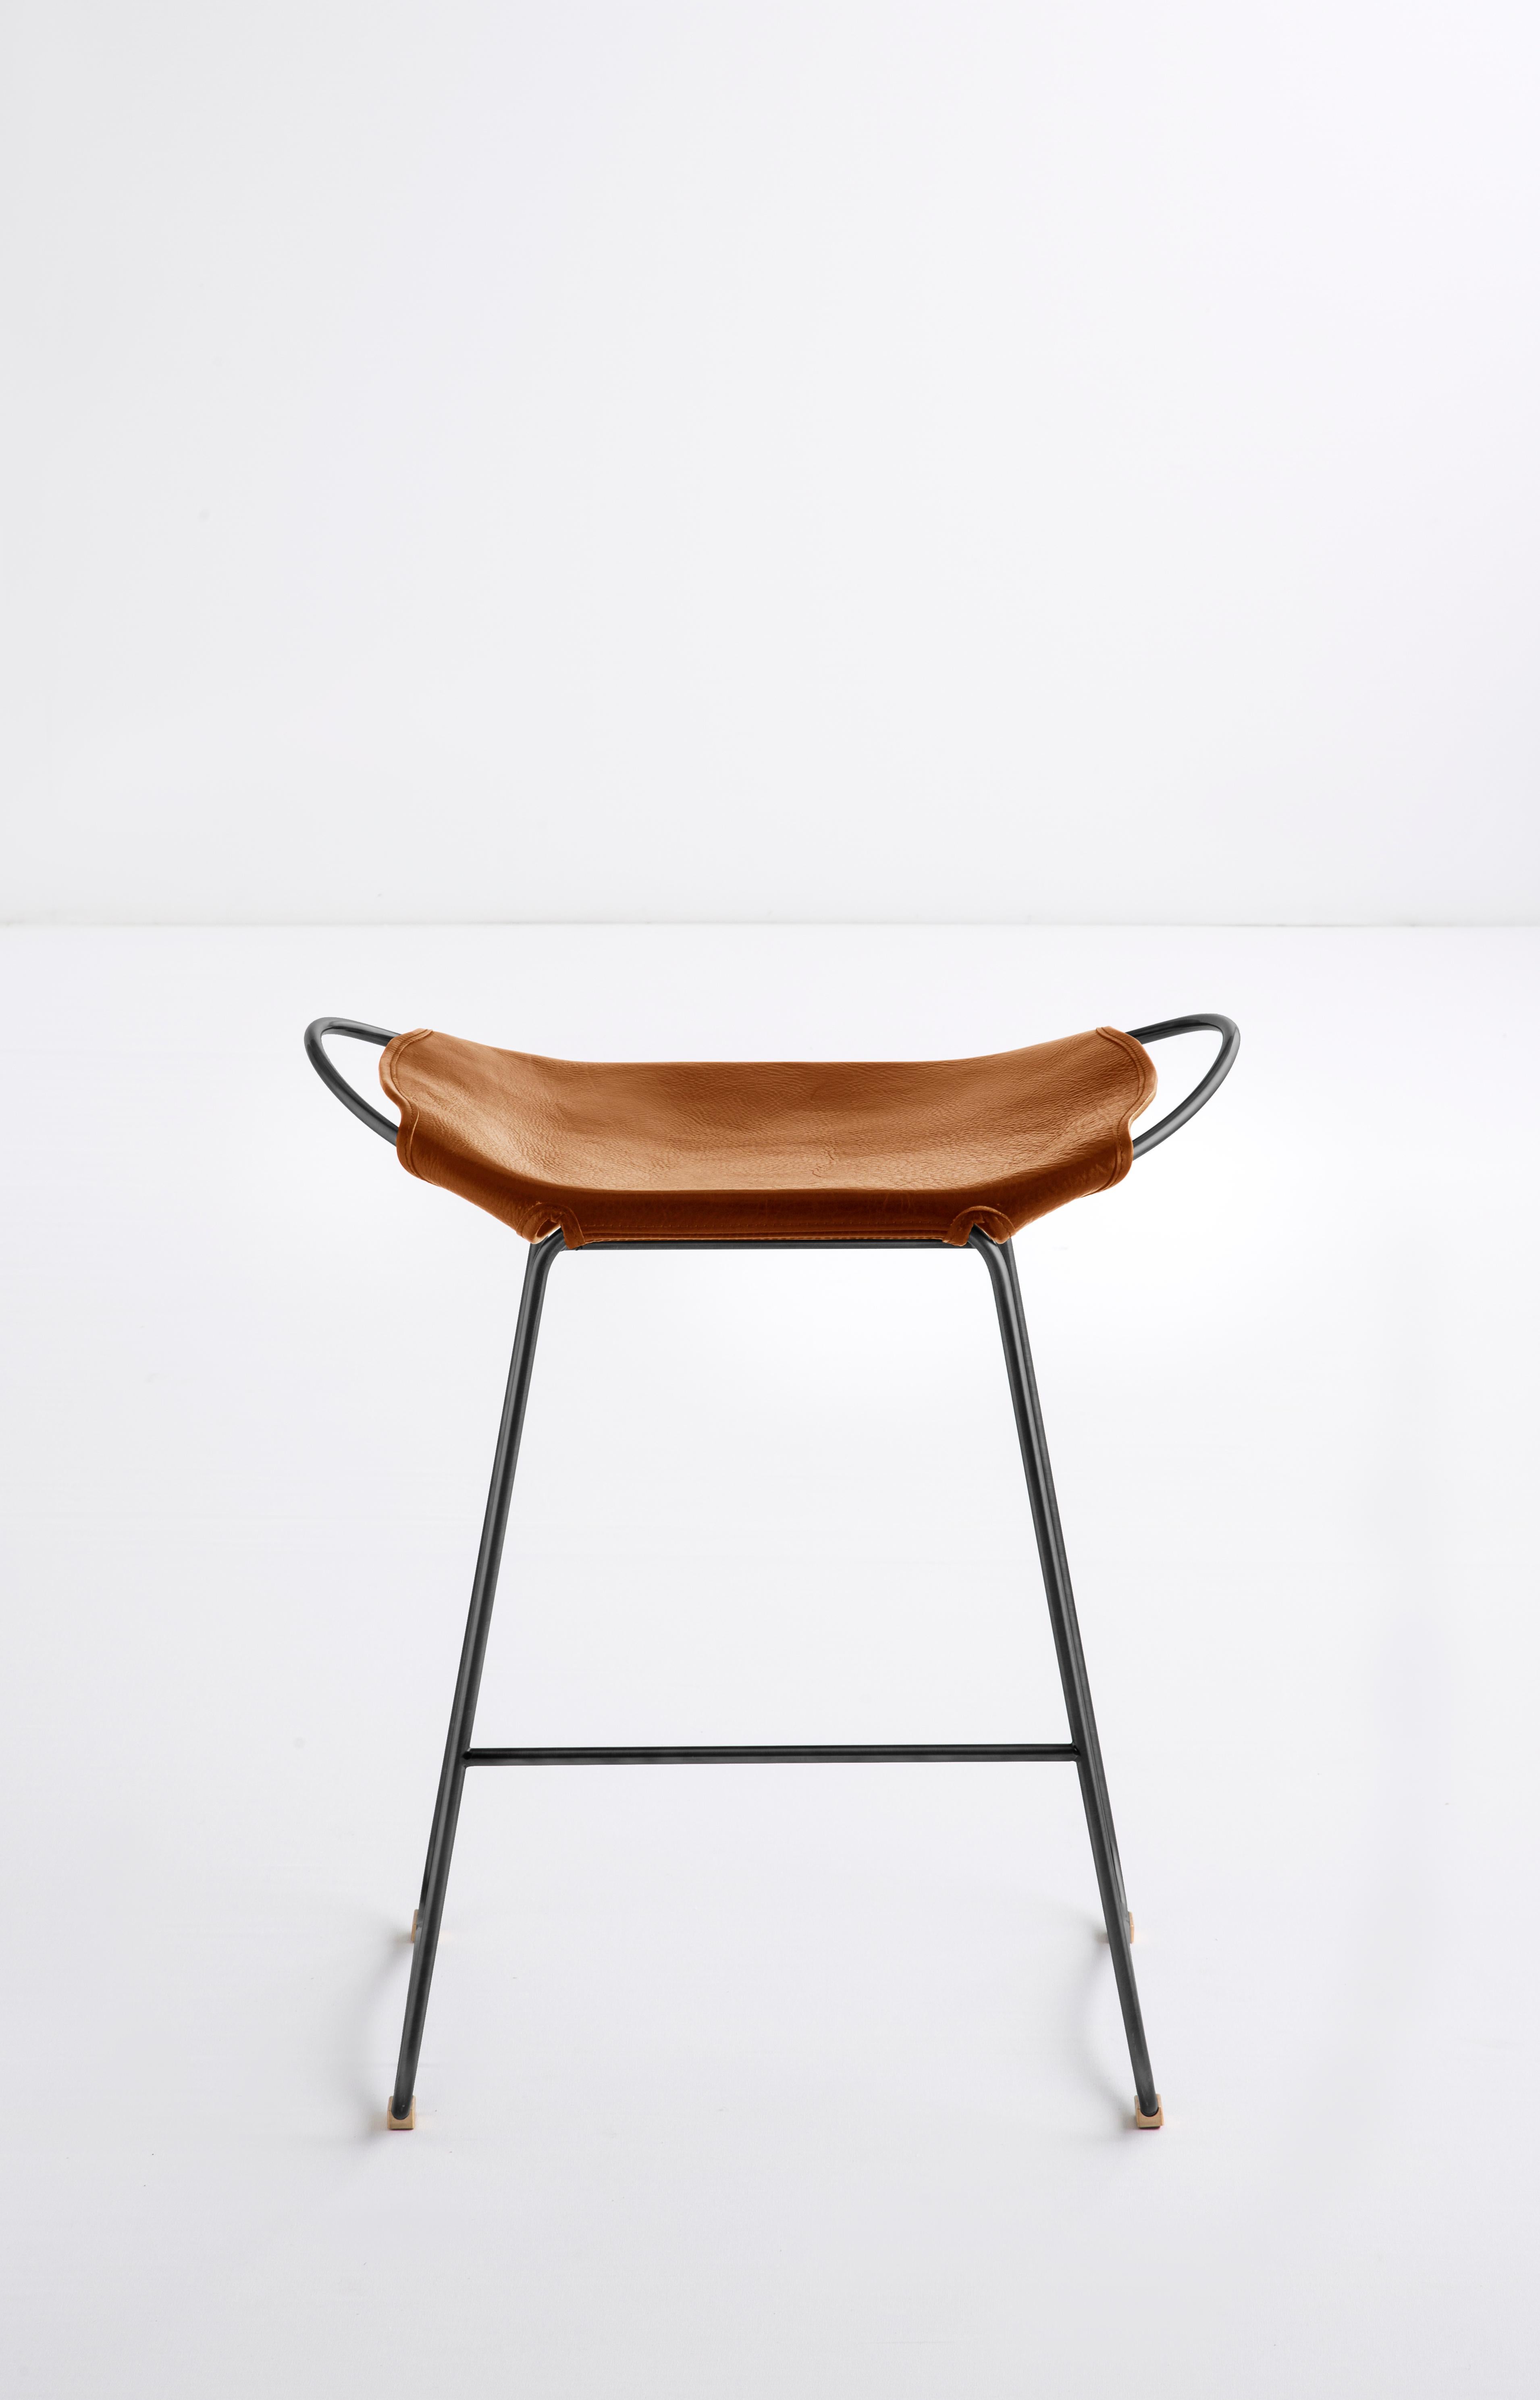 Plated Pair Contemporary Sculptural Bar Stool Black Metal & Natural Tobacco Leather For Sale